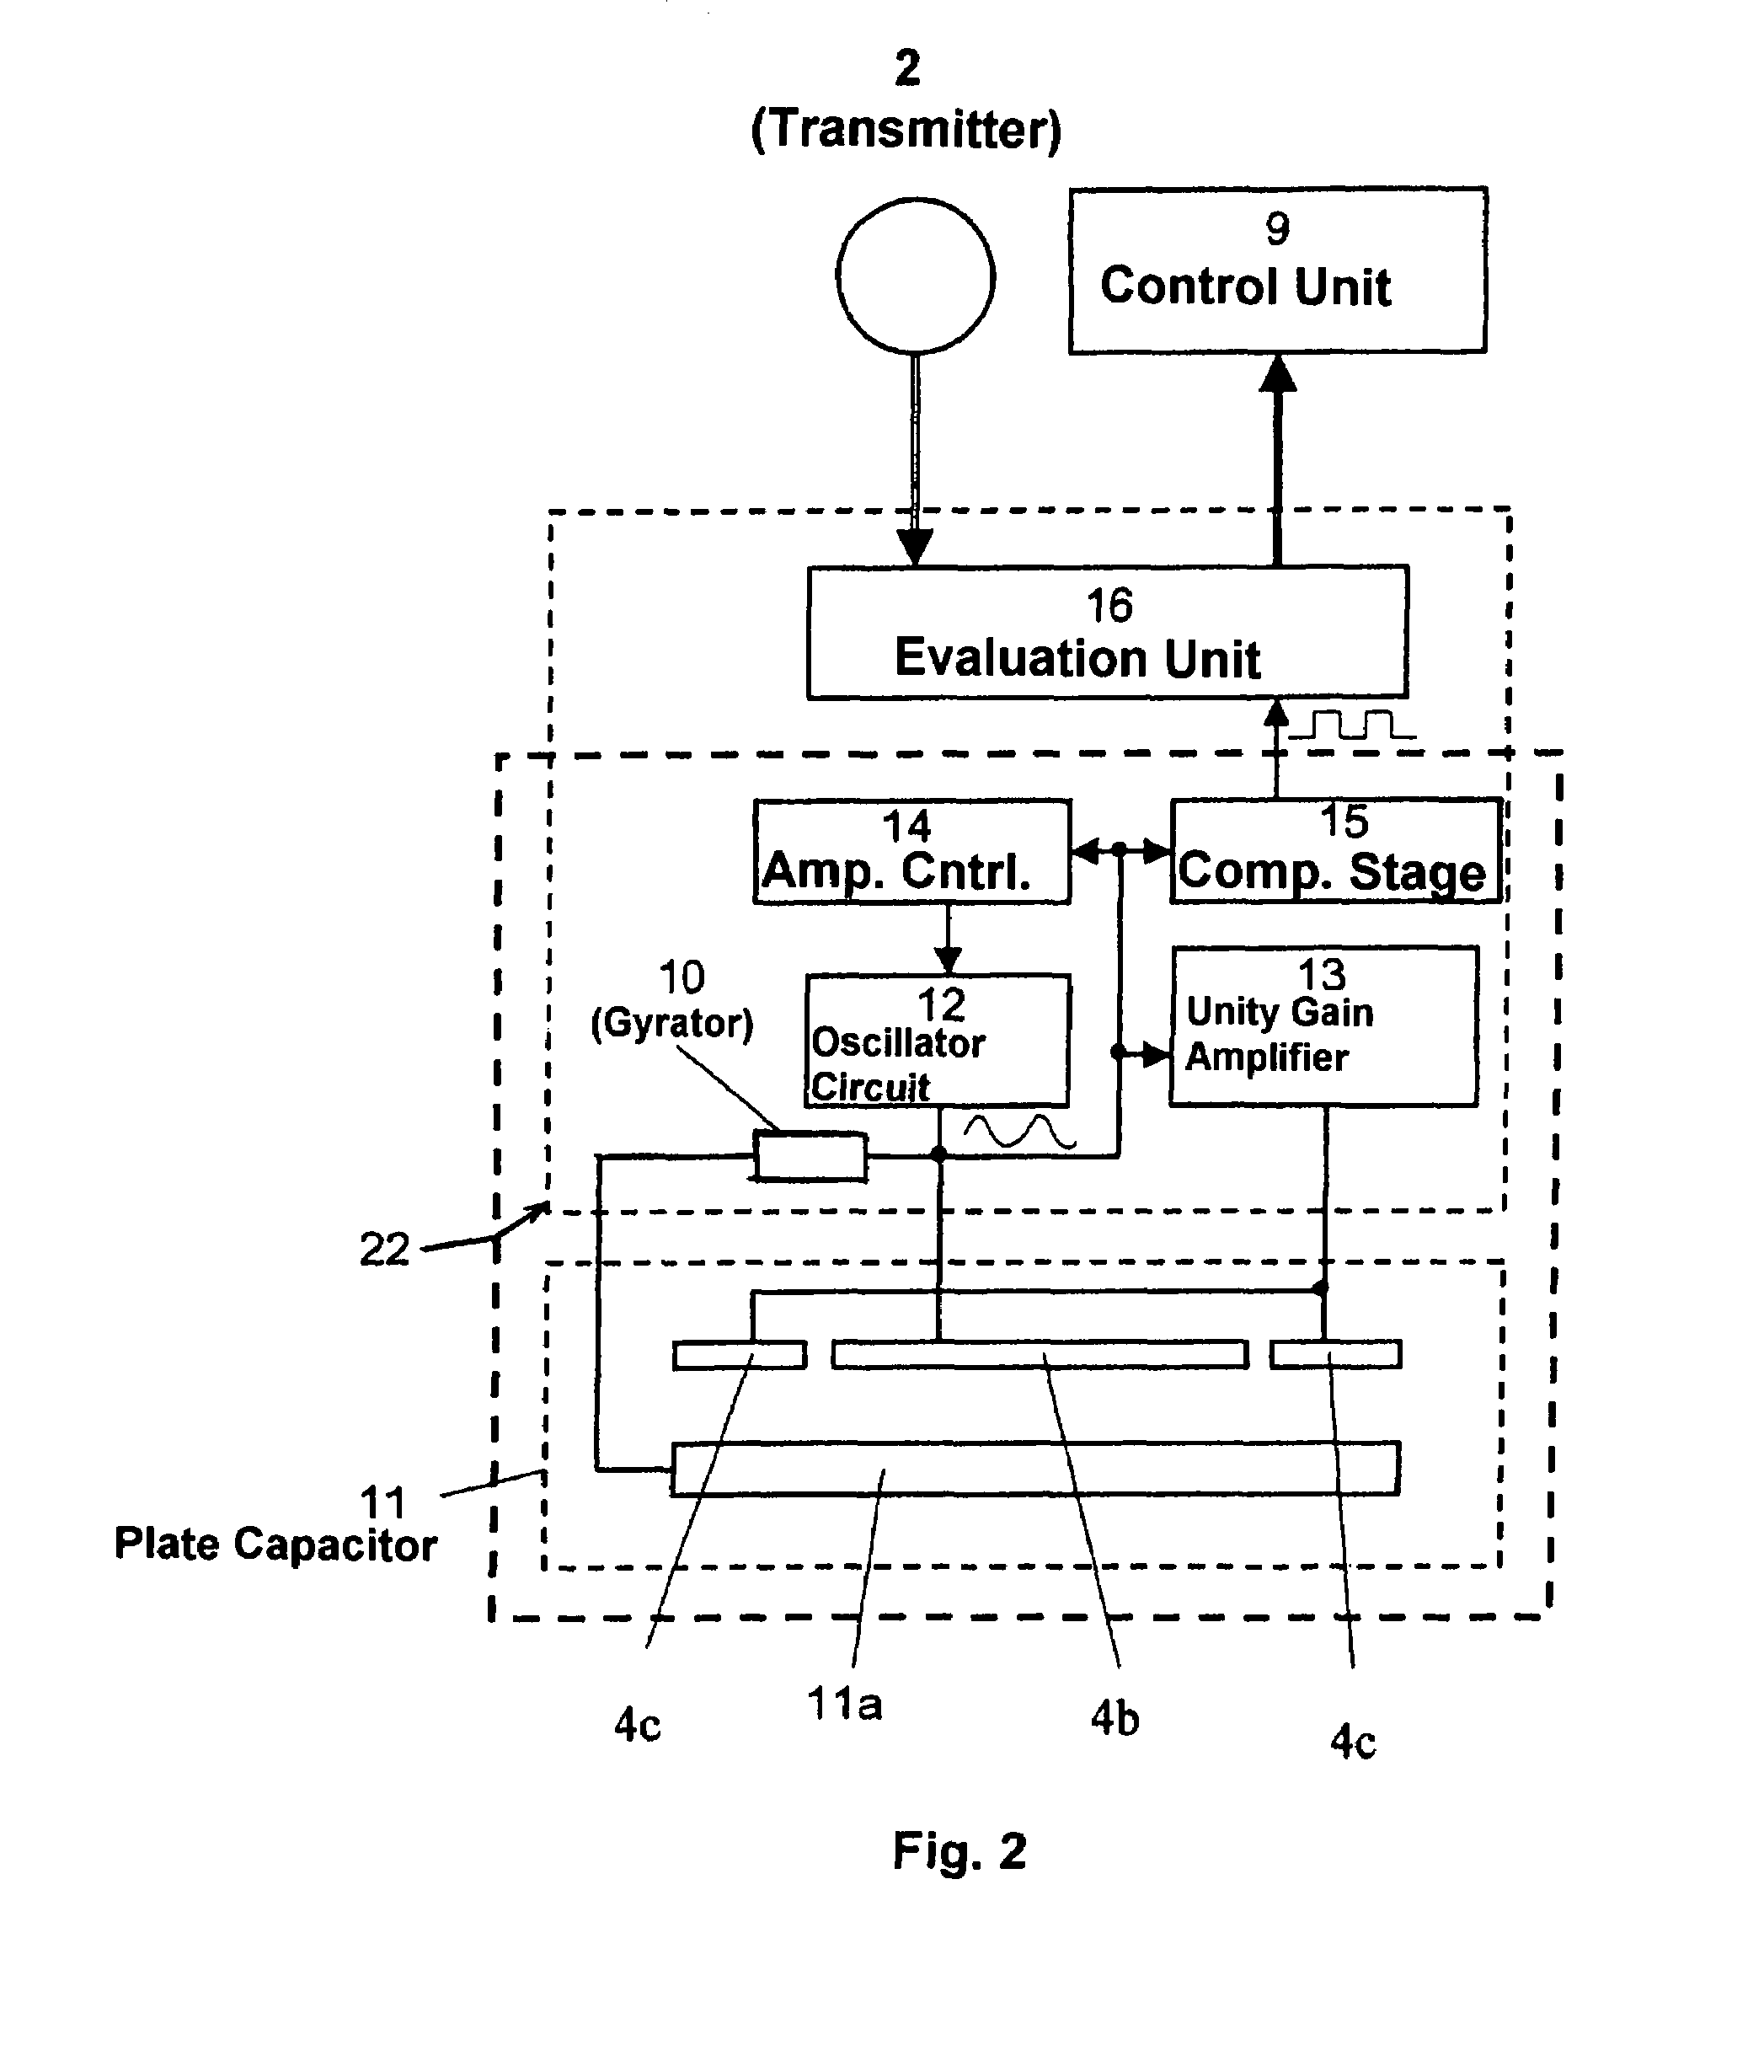 Method for measuring thickness of print products passing spaced apart at specific distances in a conveying flow through a measuring device